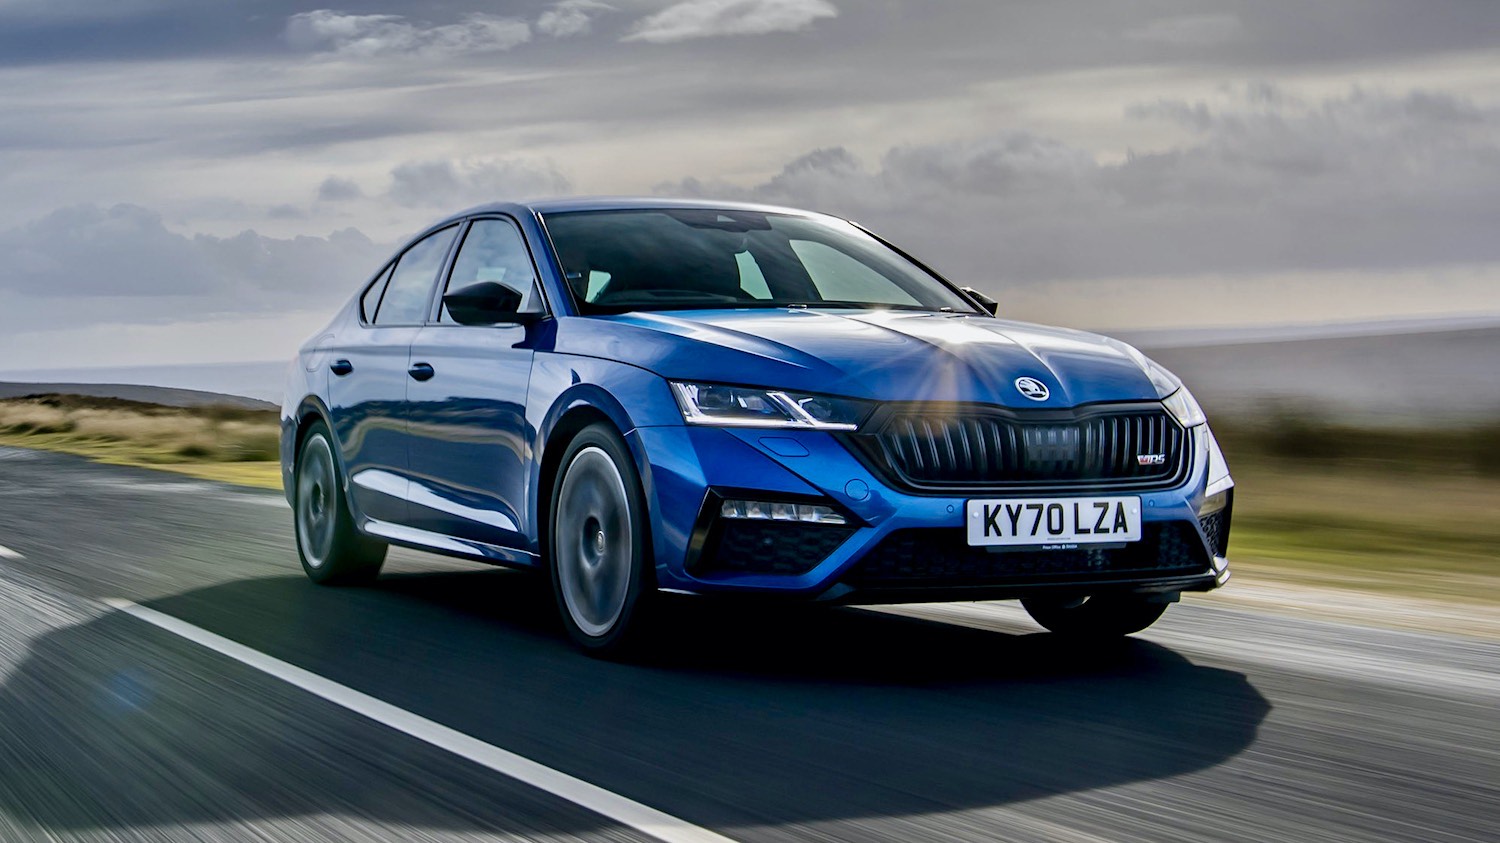 https://www.drive.co.uk/wp-content/uploads/2021/05/Maggie-Barry-reviews-the-Skoda-Octavia-vRS-iV-for-Drive-4.jpeg